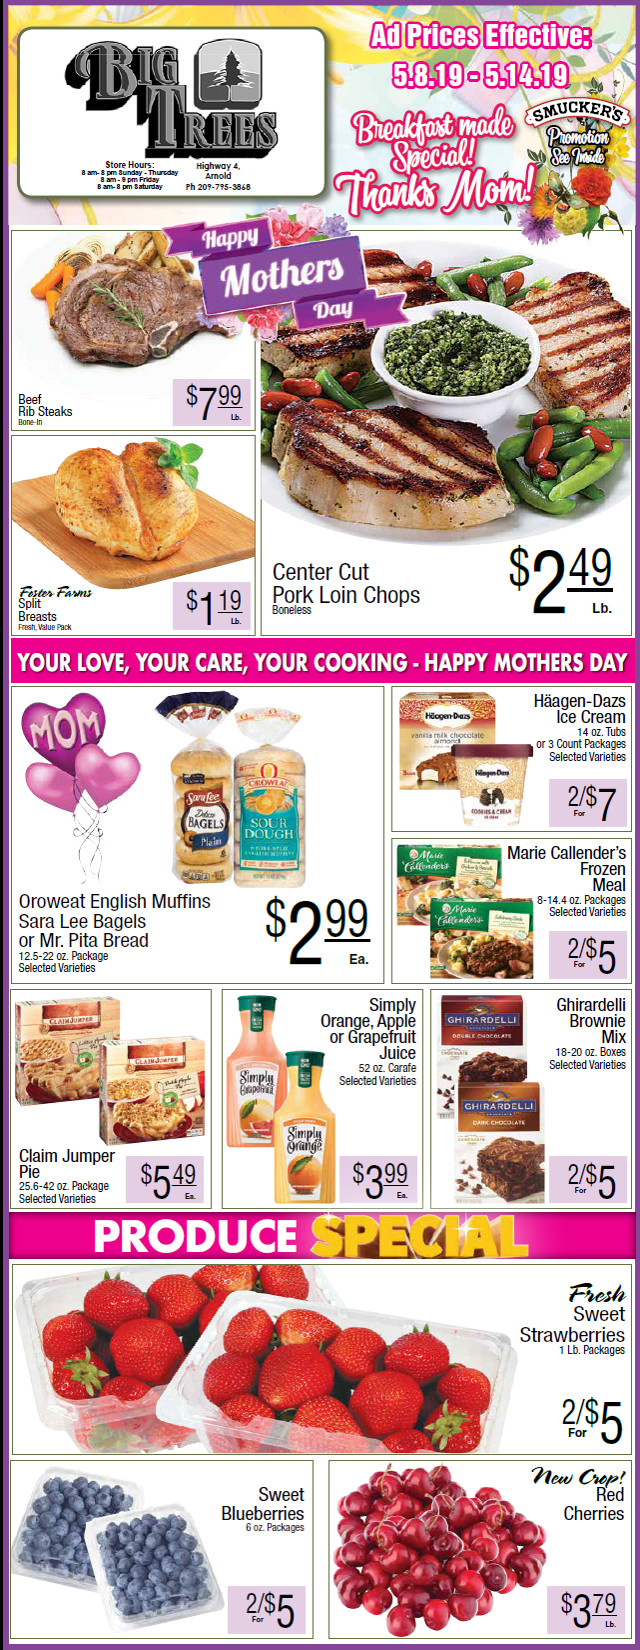 Big Trees Market Weekly Ad & Grocery Specials Through May 14th